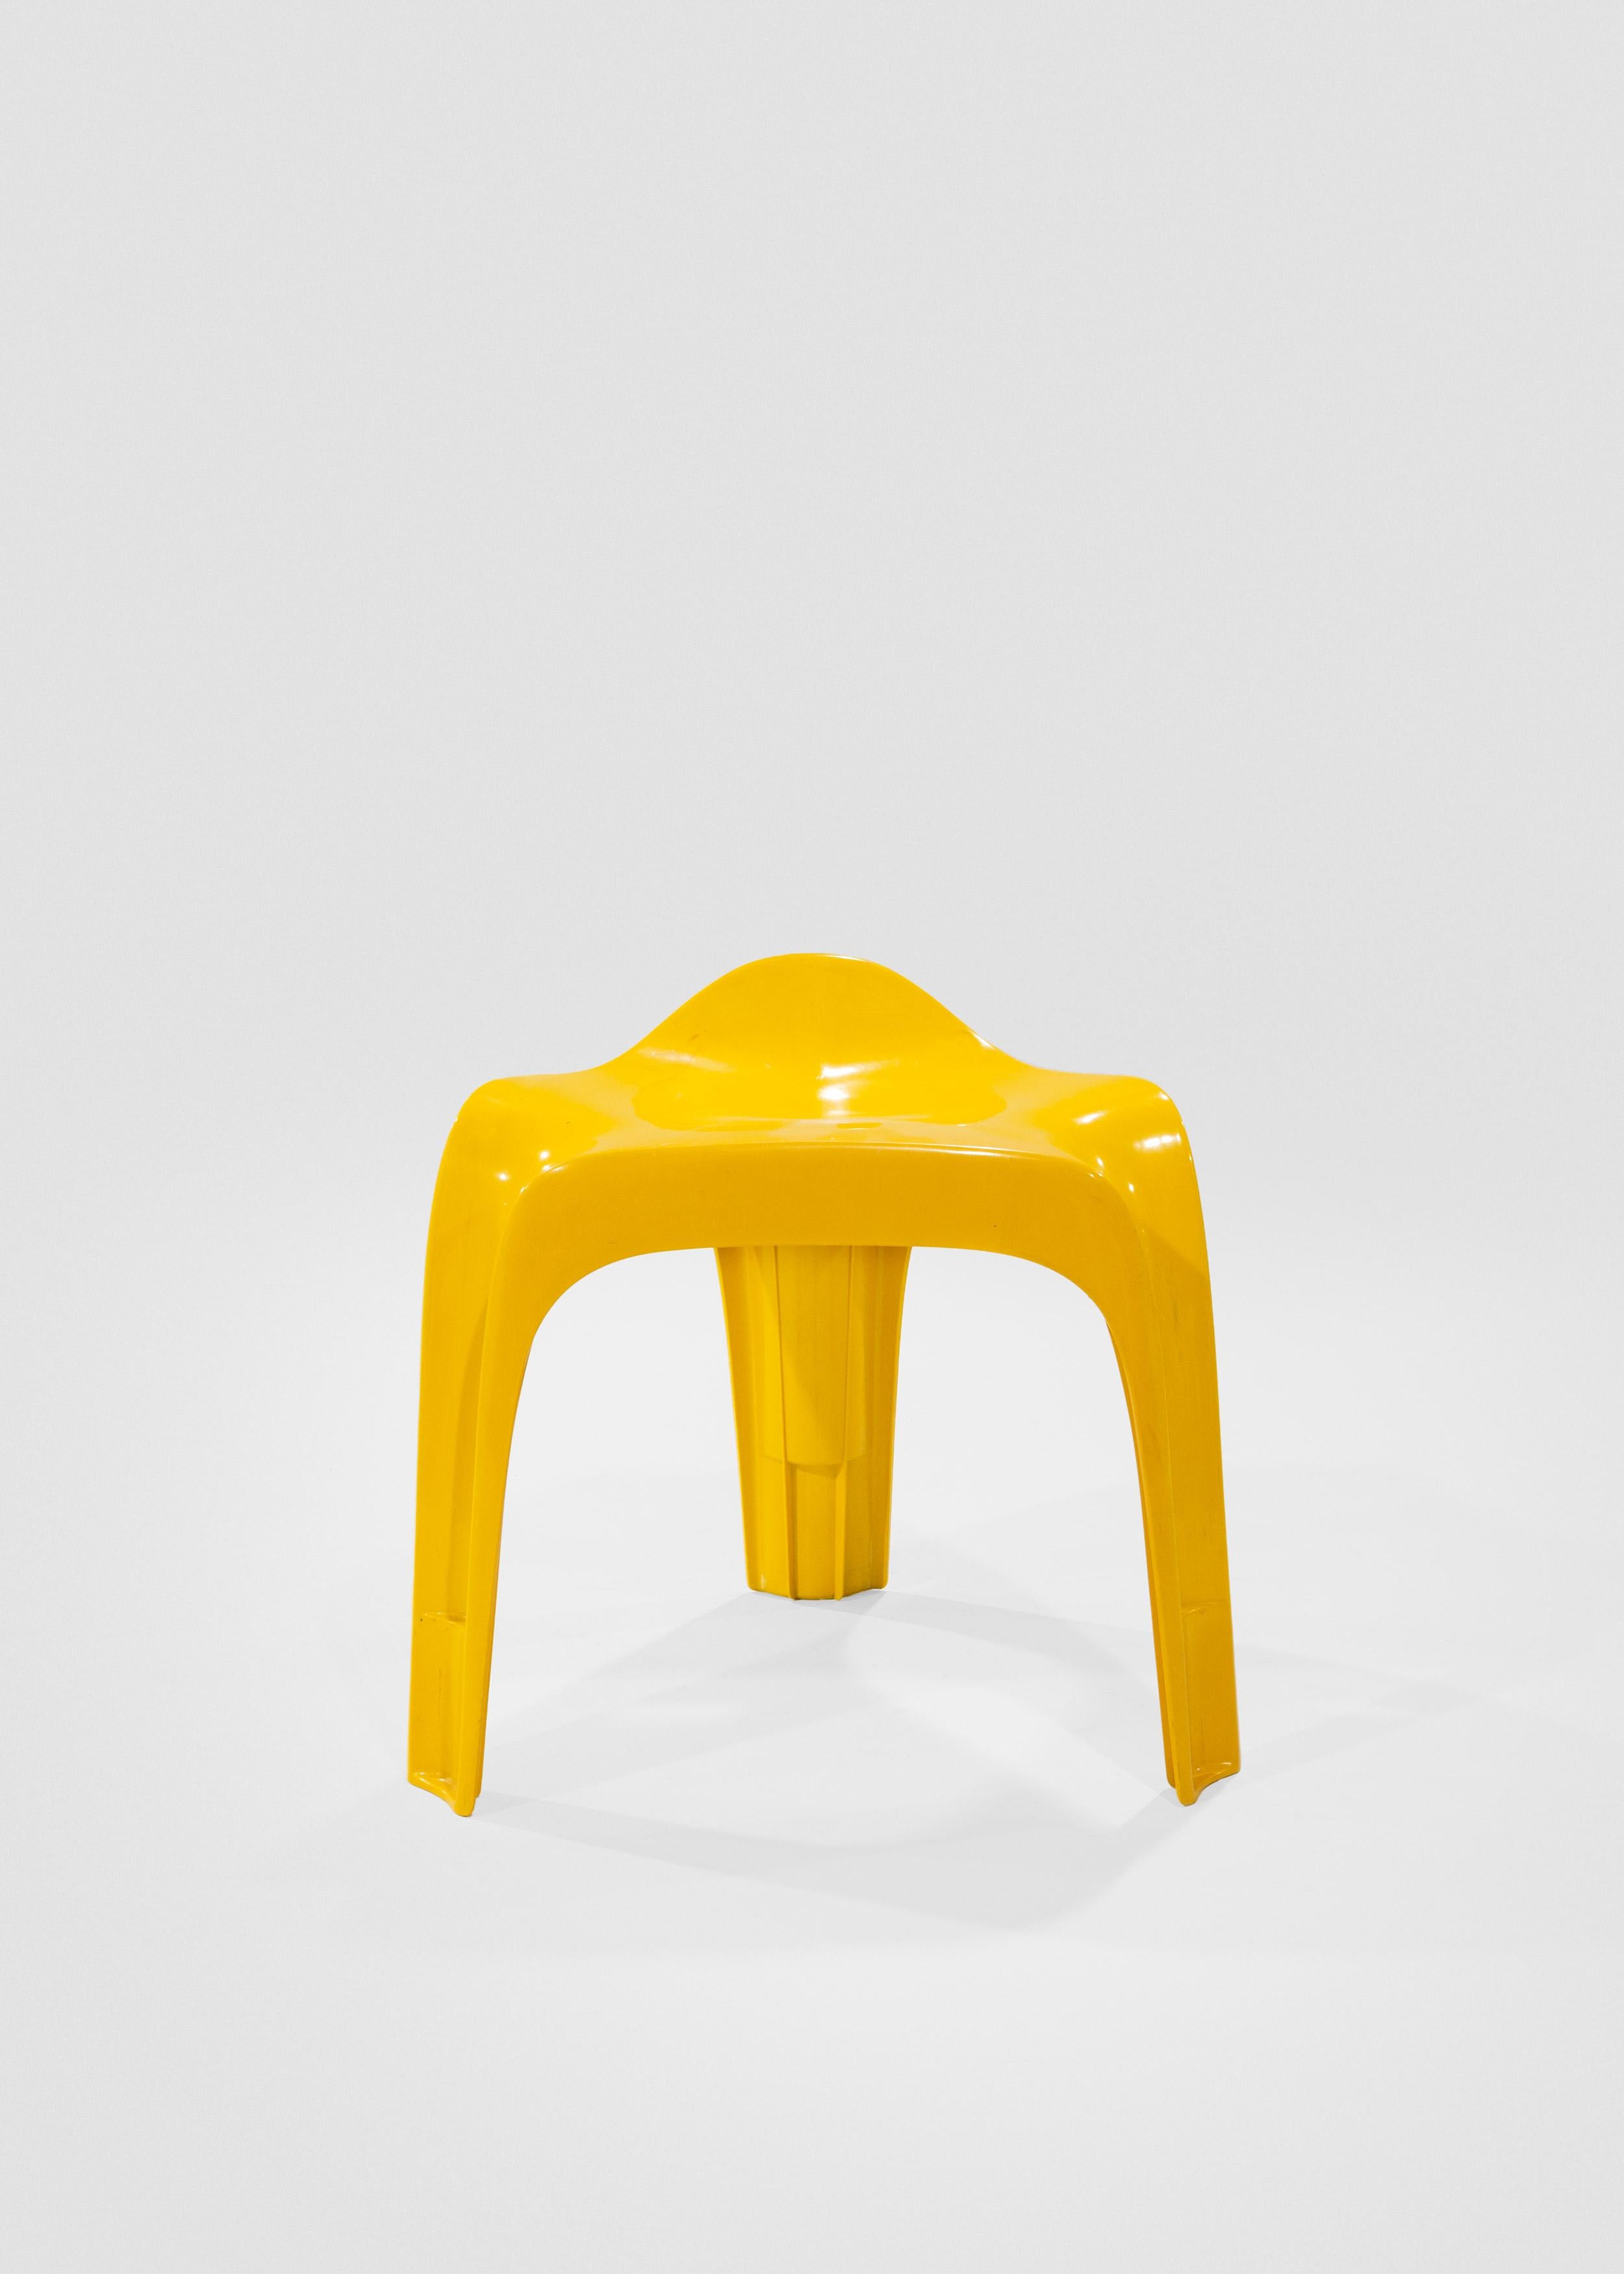 stacking plastic stools